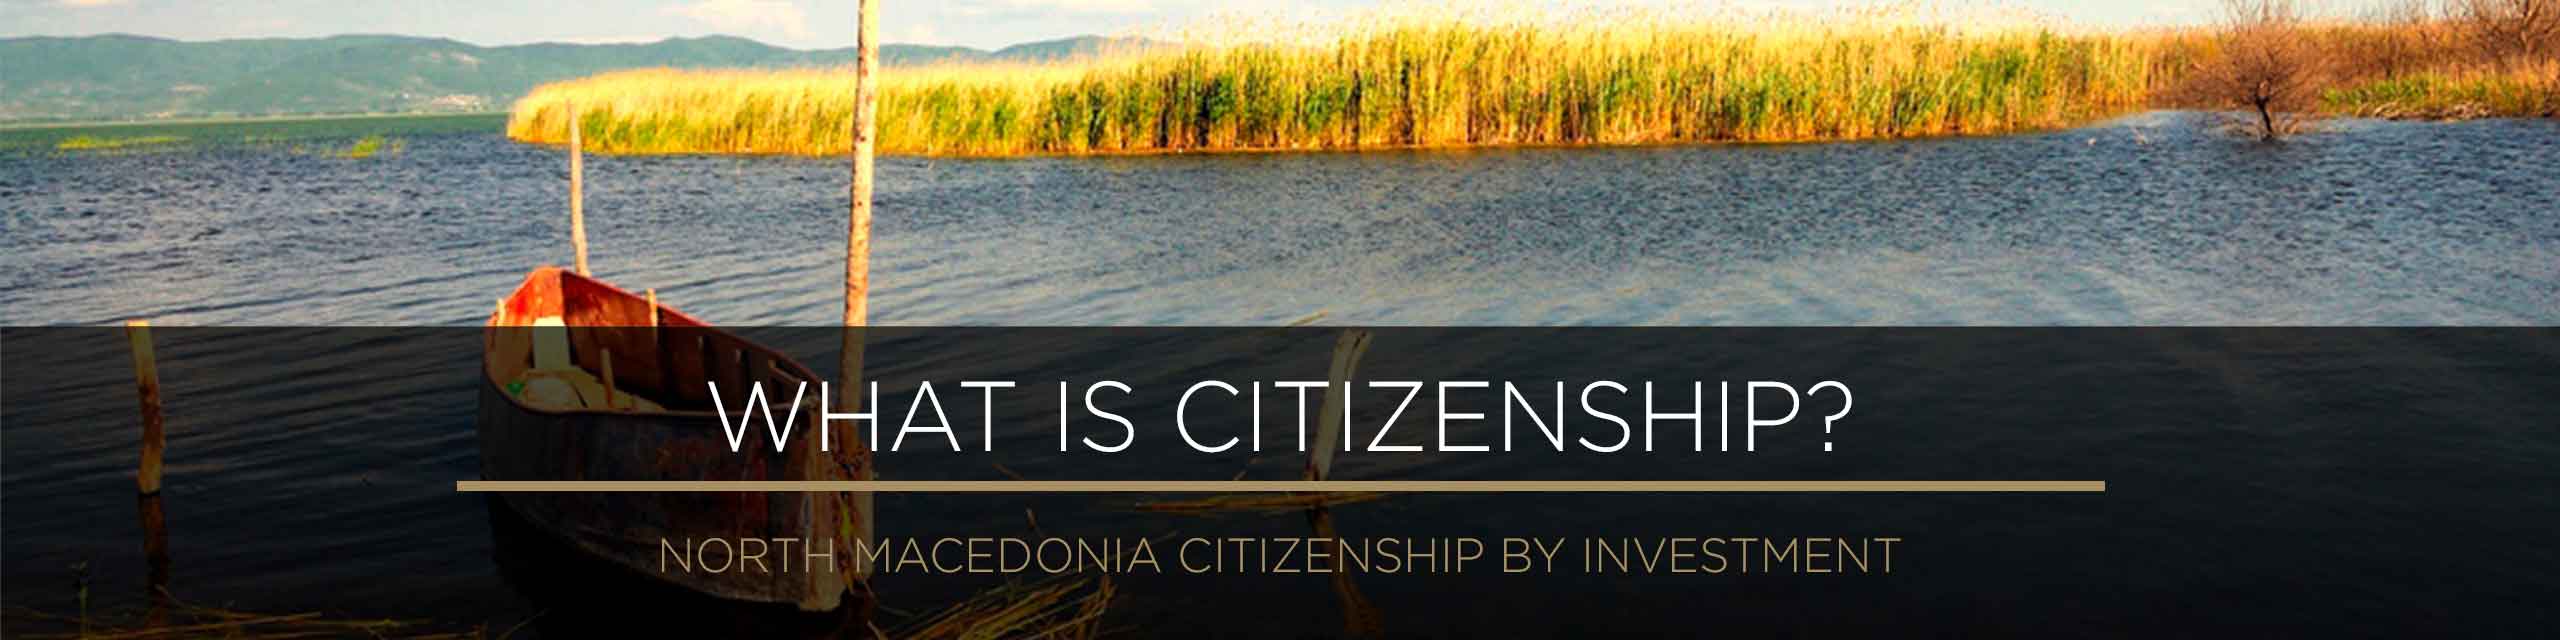 North Macedonia - What is Citizenship?